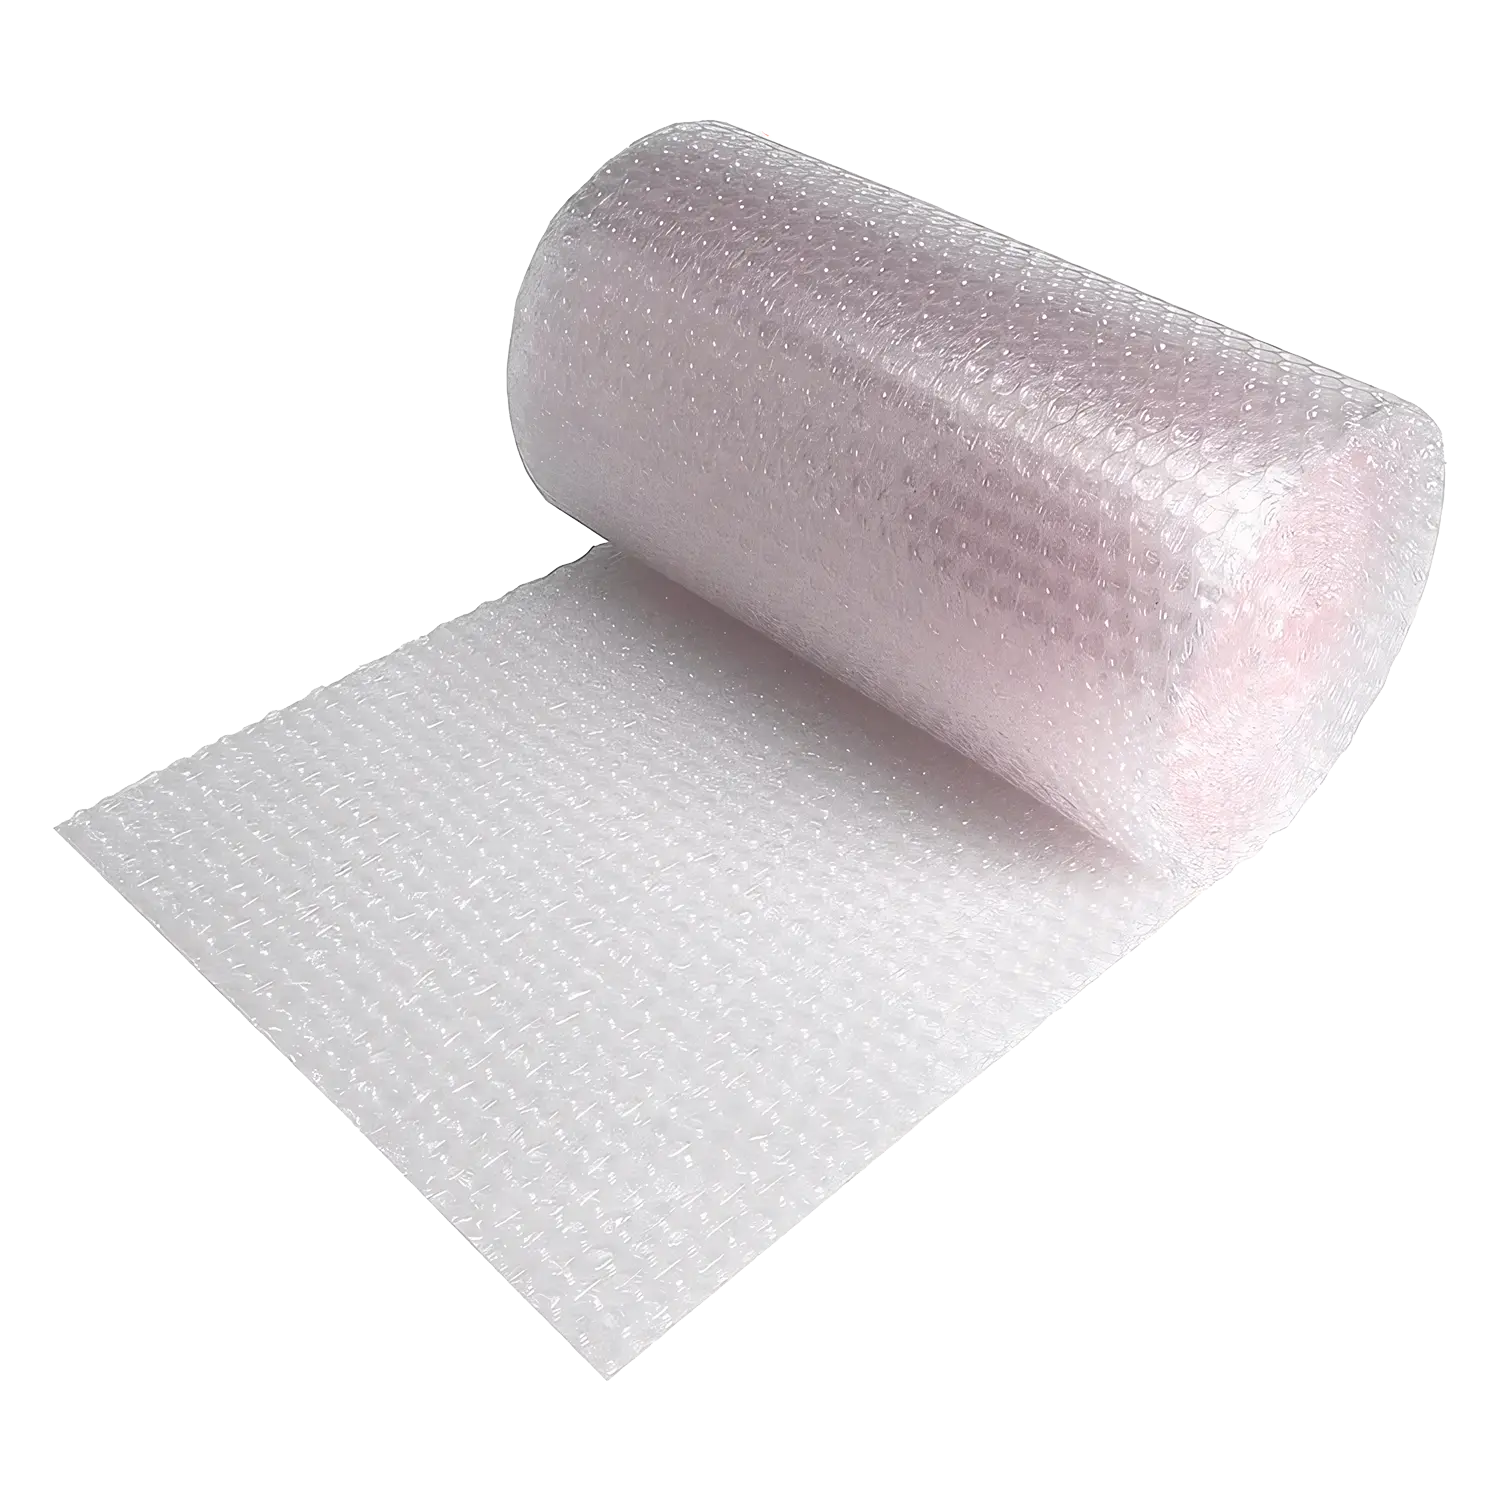 Small Bubble Wrap Roll 500mm x 100m